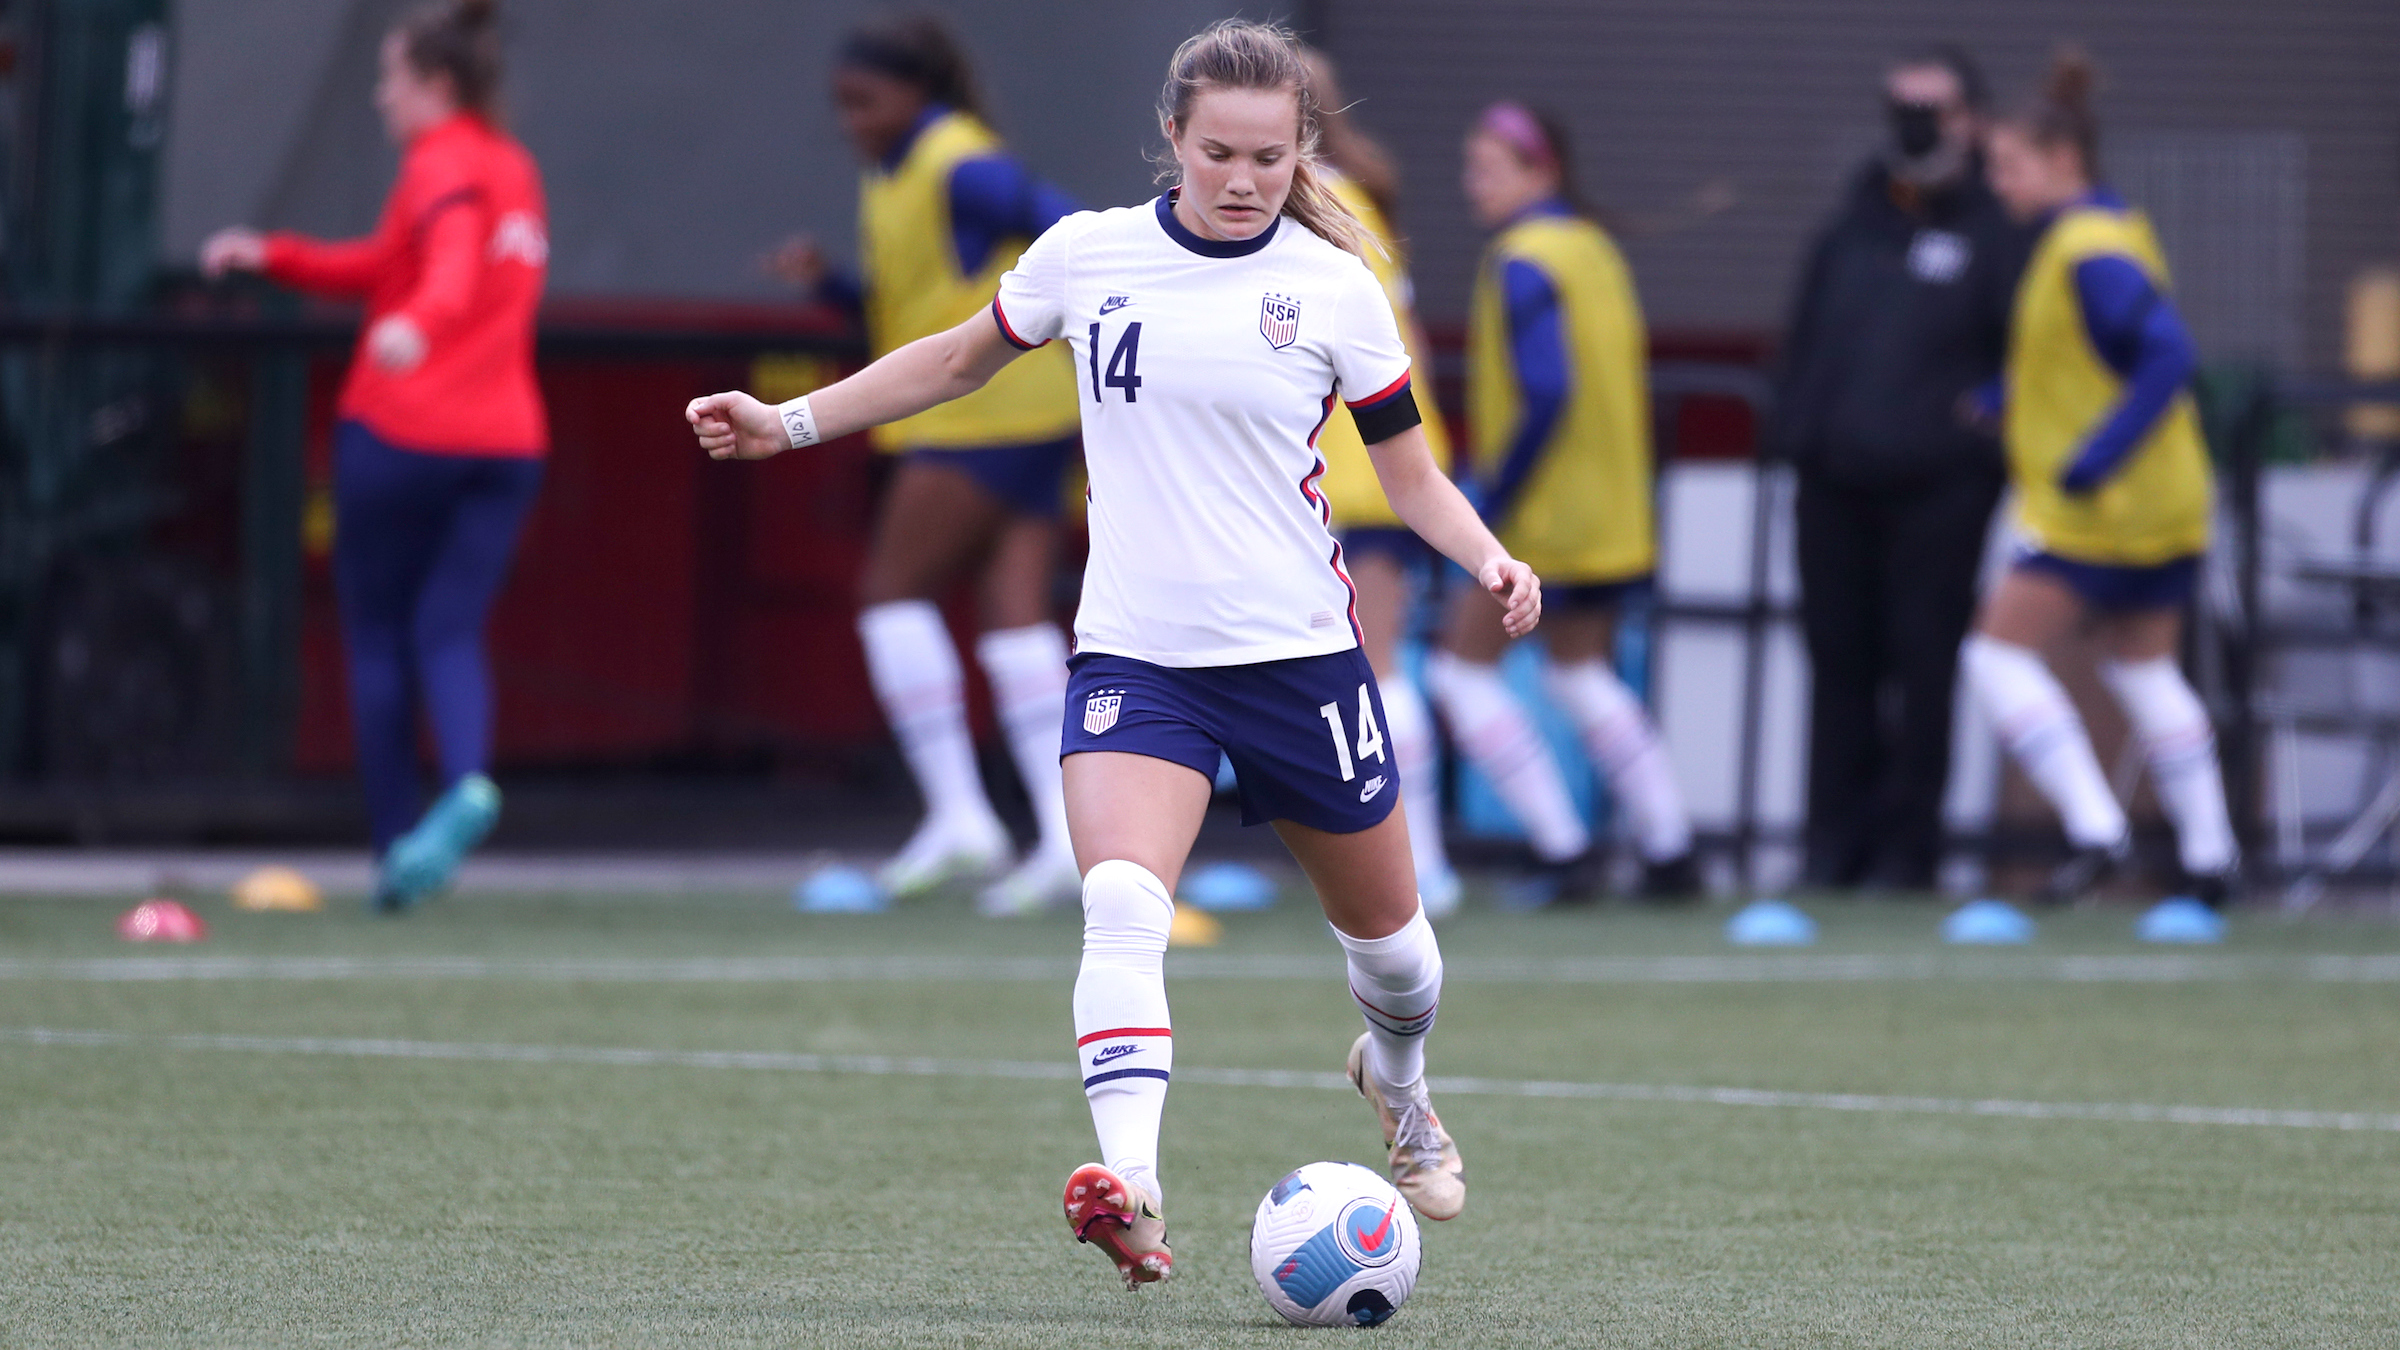 Three New England players named to U.S. U-23 women's roster - New